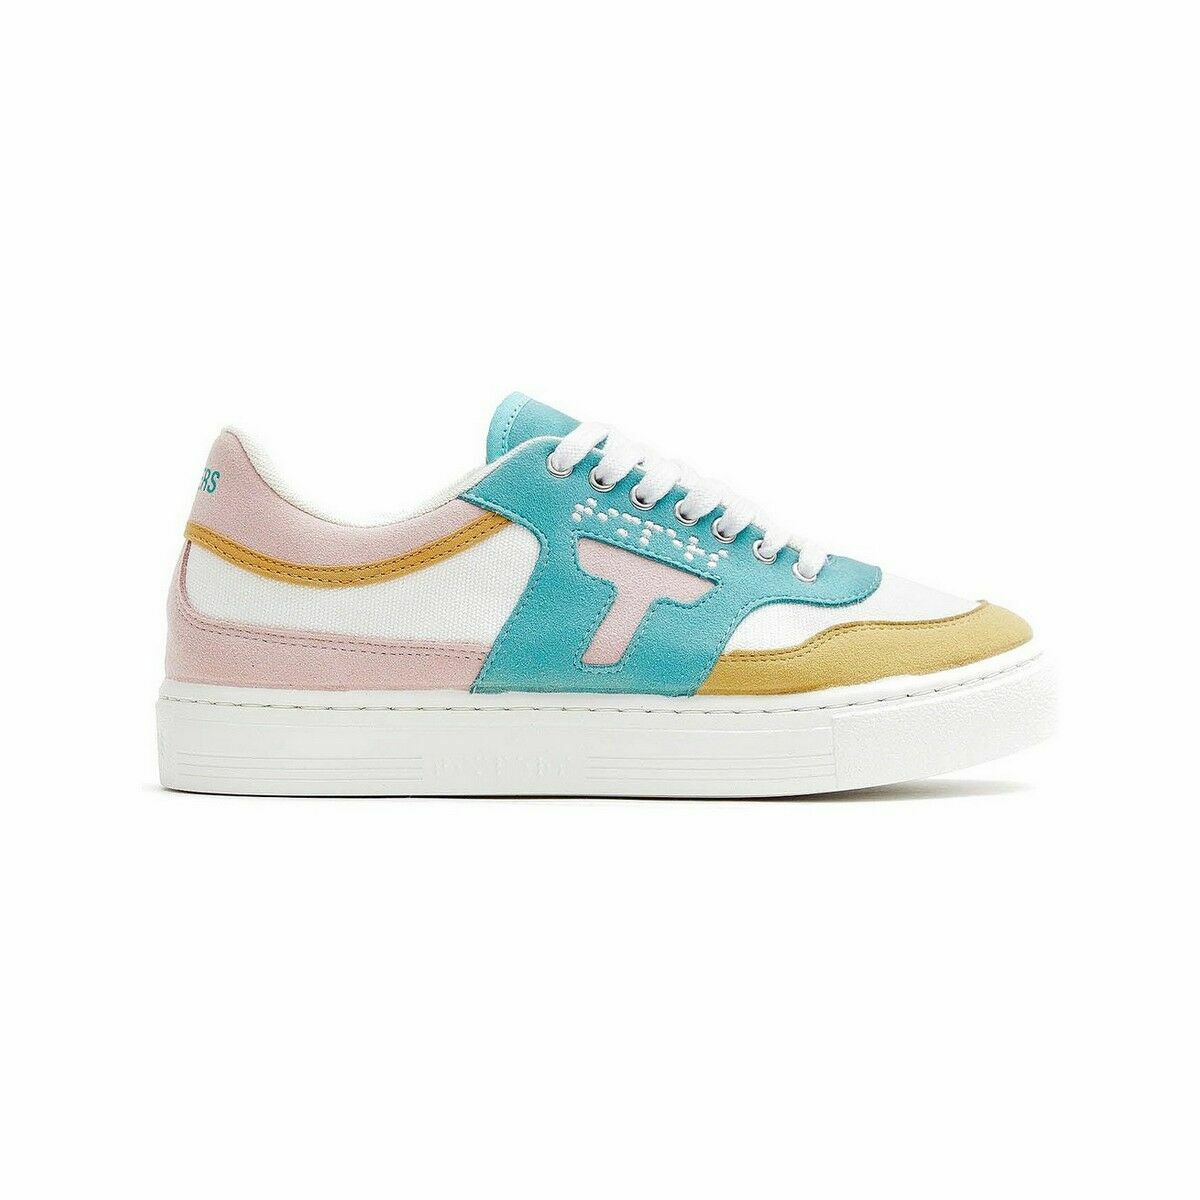 Chaussures casual unisex Timpers Trend Pastel Bleu